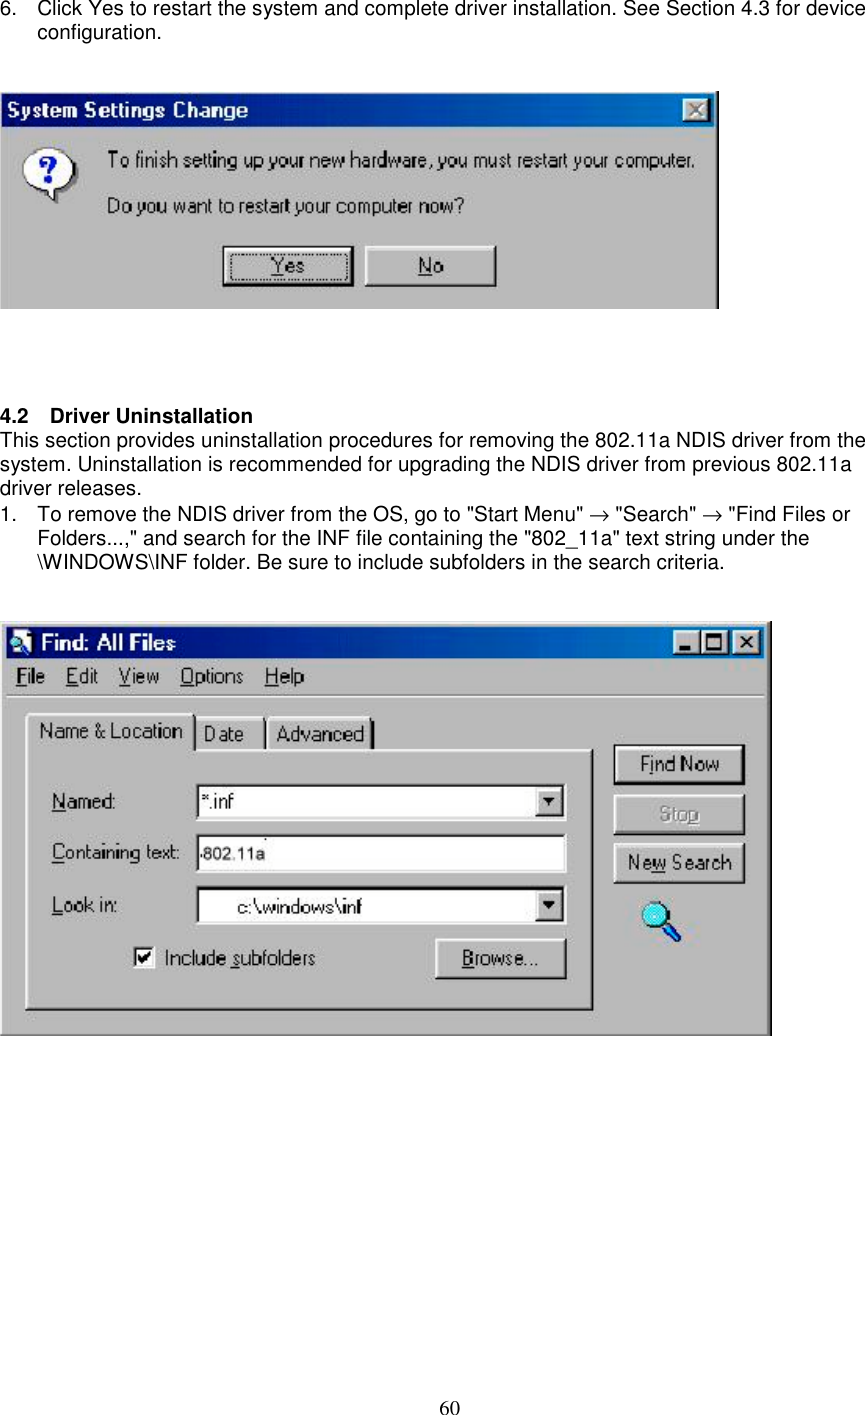 606.  Click Yes to restart the system and complete driver installation. See Section 4.3 for deviceconfiguration.4.2 Driver UninstallationThis section provides uninstallation procedures for removing the 802.11a NDIS driver from thesystem. Uninstallation is recommended for upgrading the NDIS driver from previous 802.11adriver releases.1.  To remove the NDIS driver from the OS, go to &quot;Start Menu&quot; → &quot;Search&quot; → &quot;Find Files orFolders...,&quot; and search for the INF file containing the &quot;802_11a&quot; text string under the\WINDOWS\INF folder. Be sure to include subfolders in the search criteria.